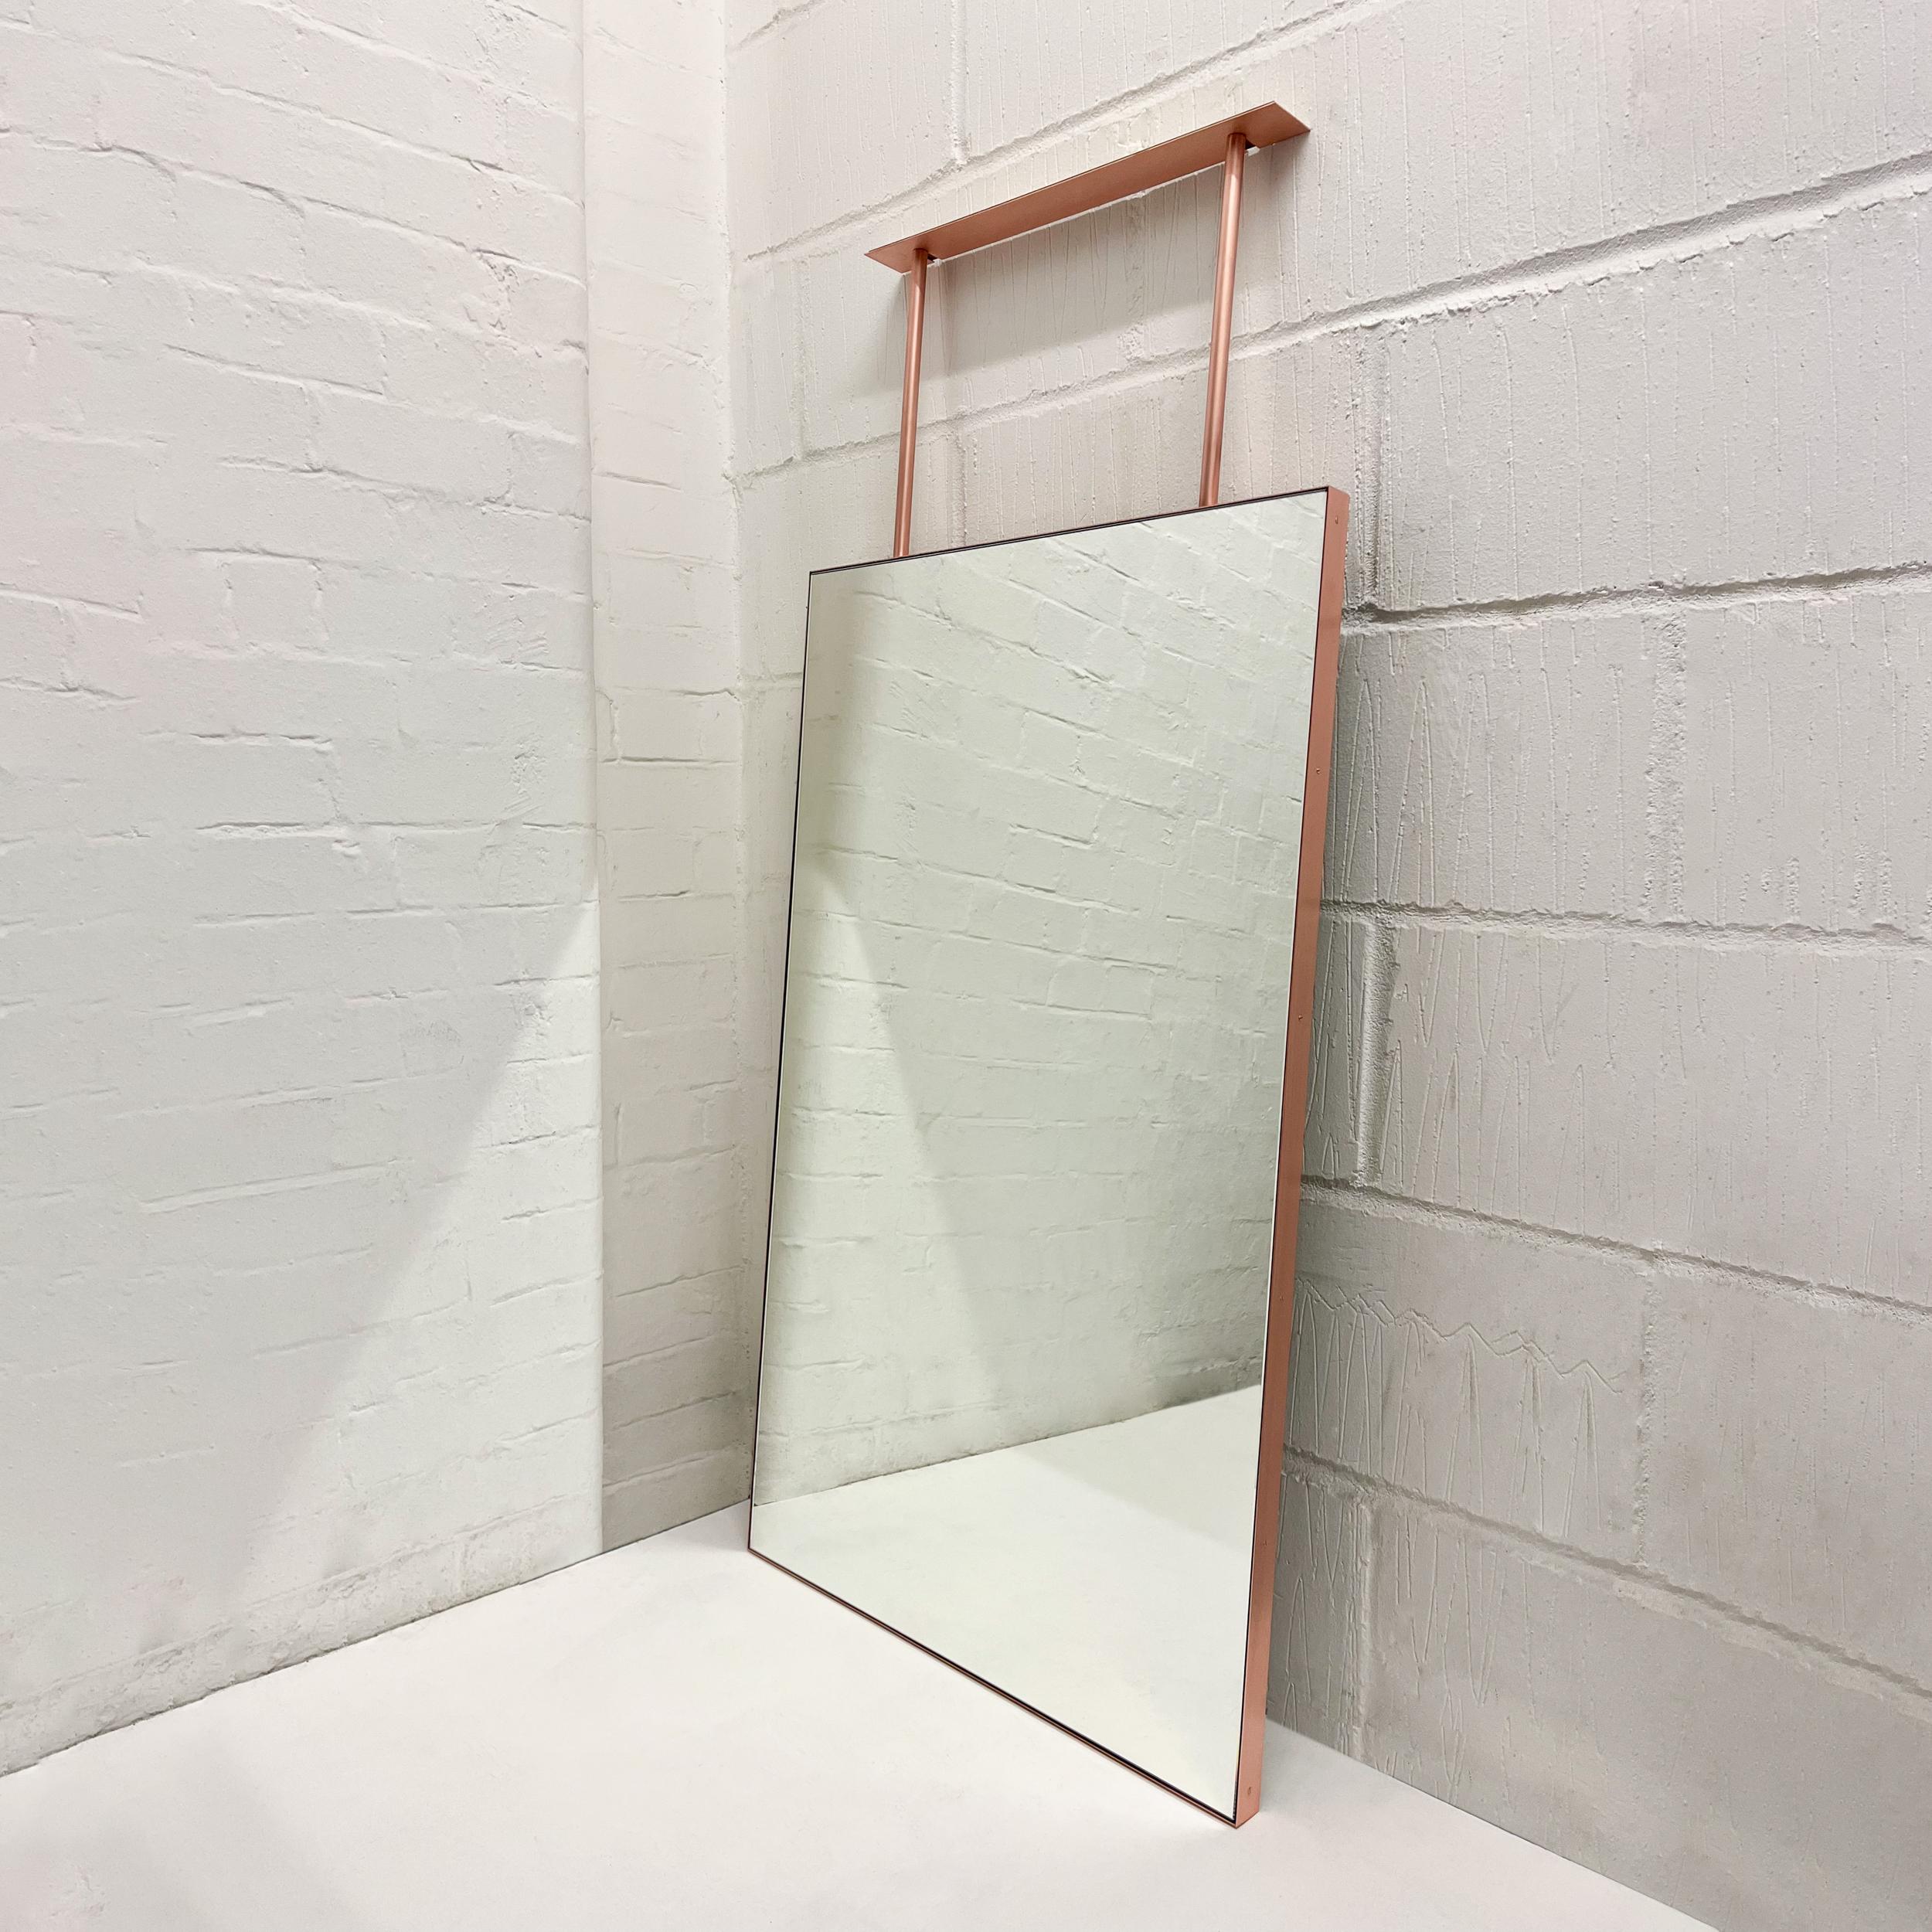 suspended mirrors